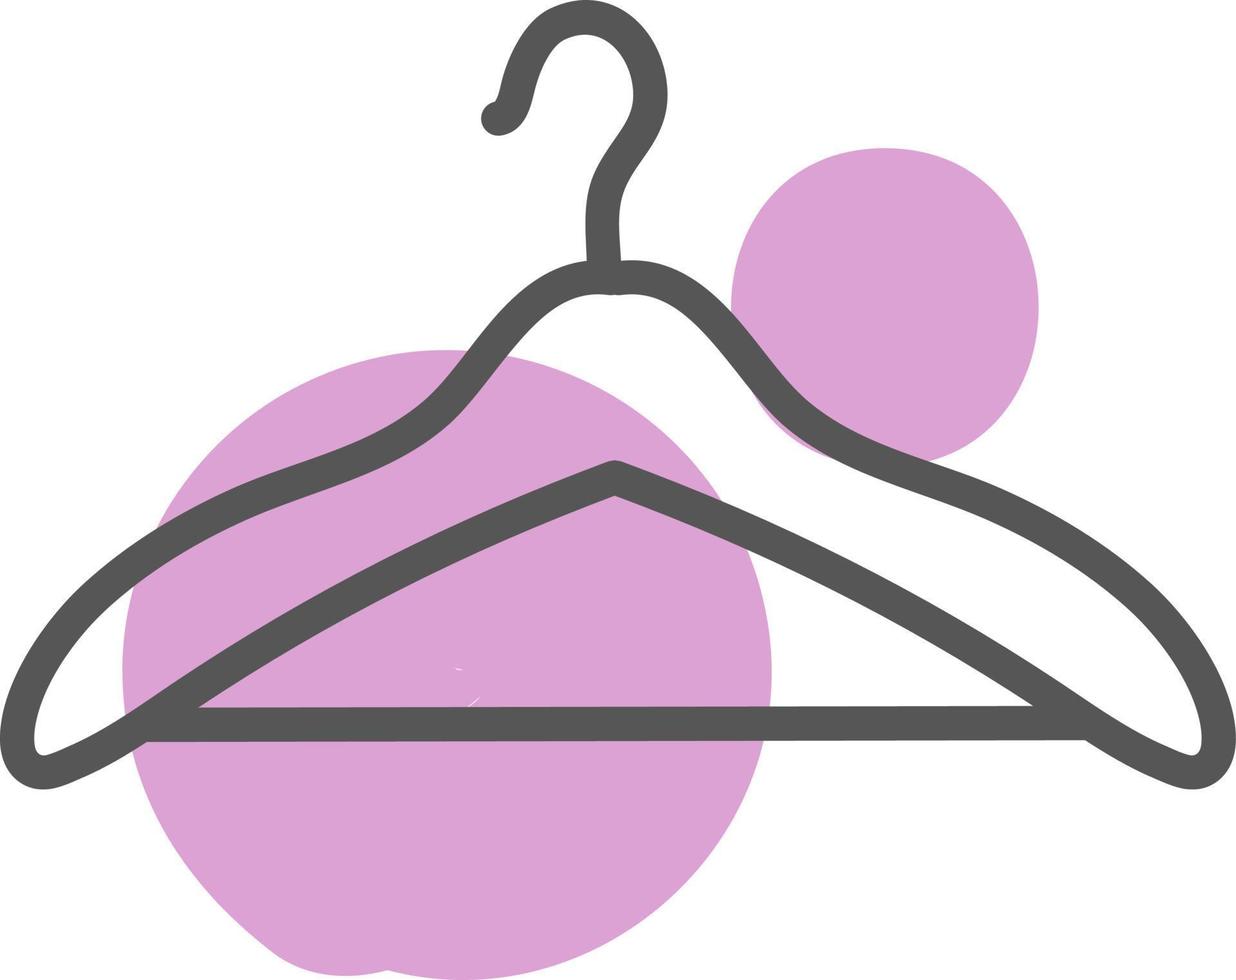 Clothing rack, illustration, vector on a white background.